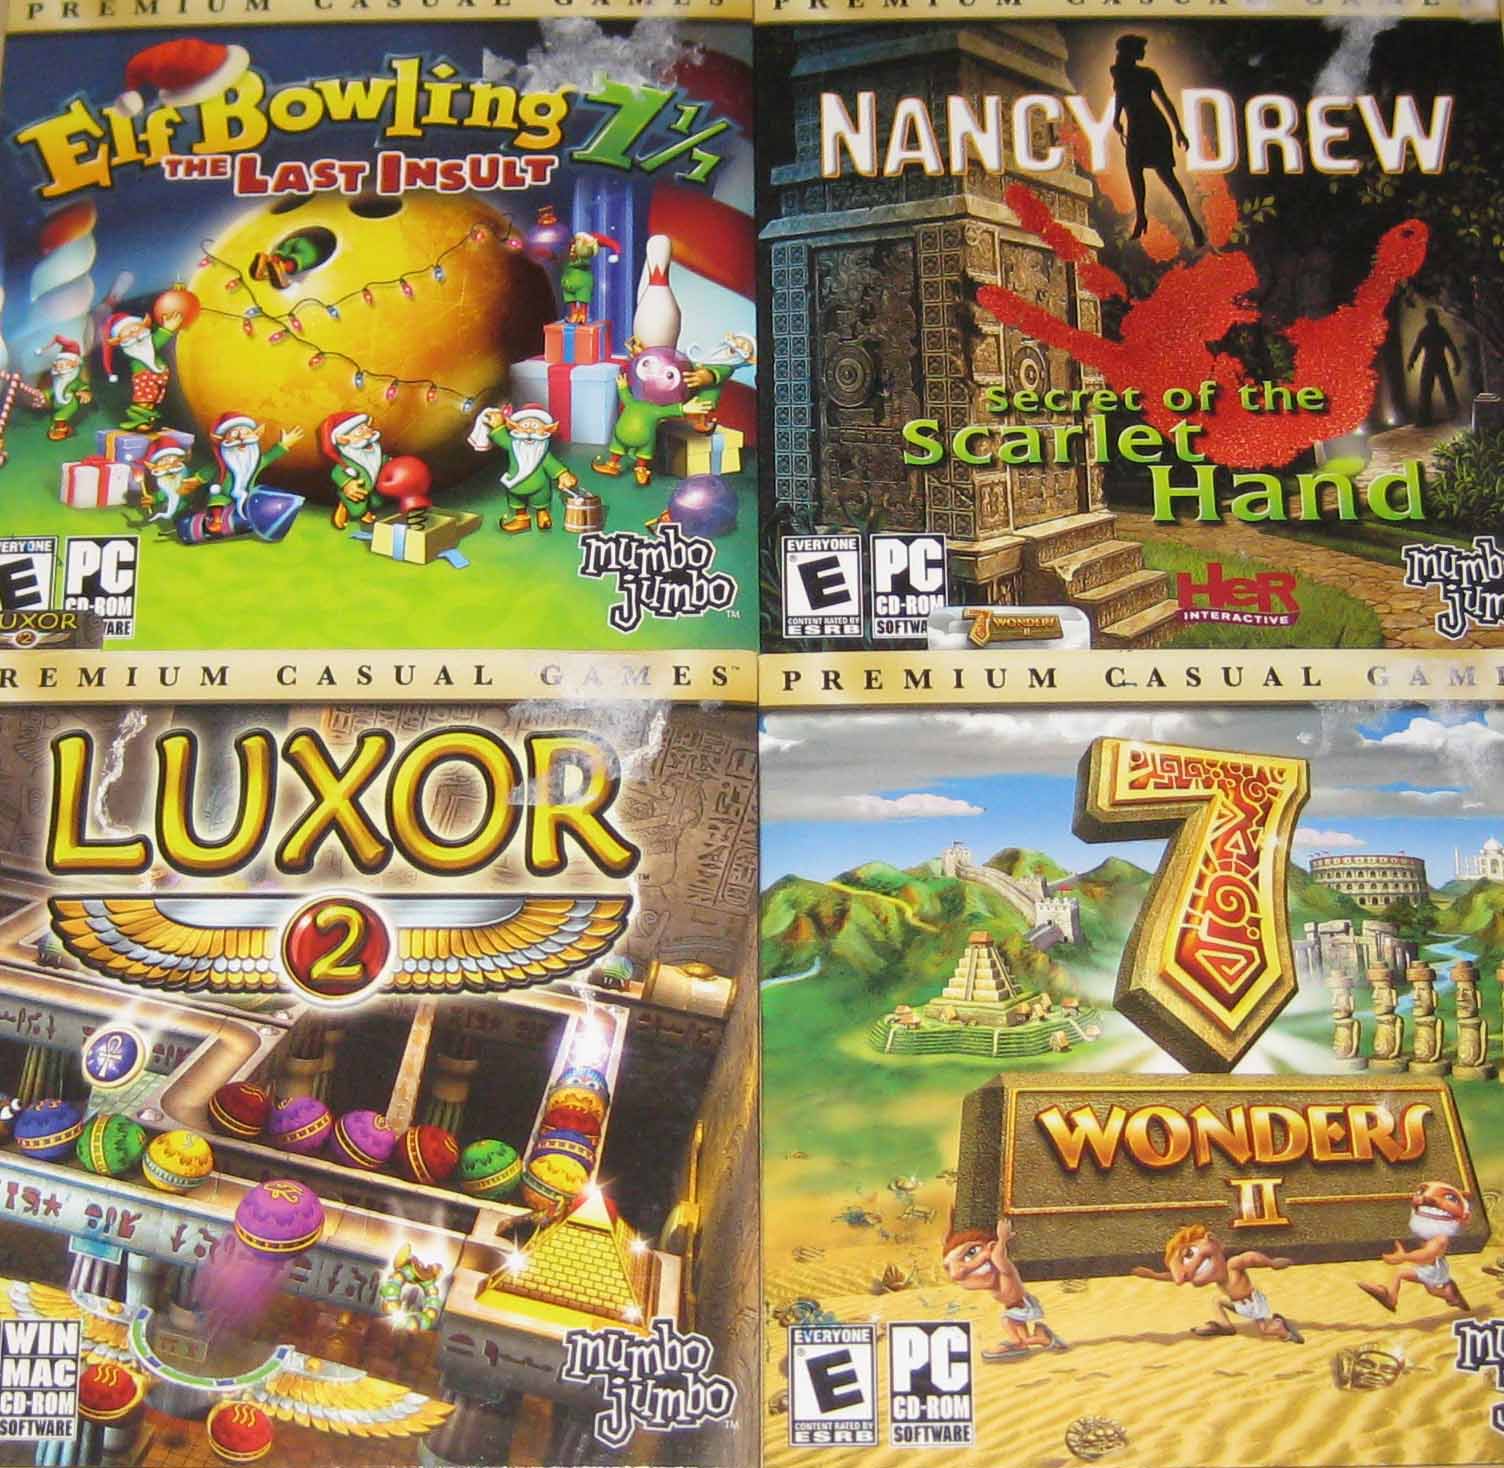 Lot of 7 Premium Casual Games, Mumbo Jumbo, 1 New, 6 Preowned, Tested, PC  CD-Rom